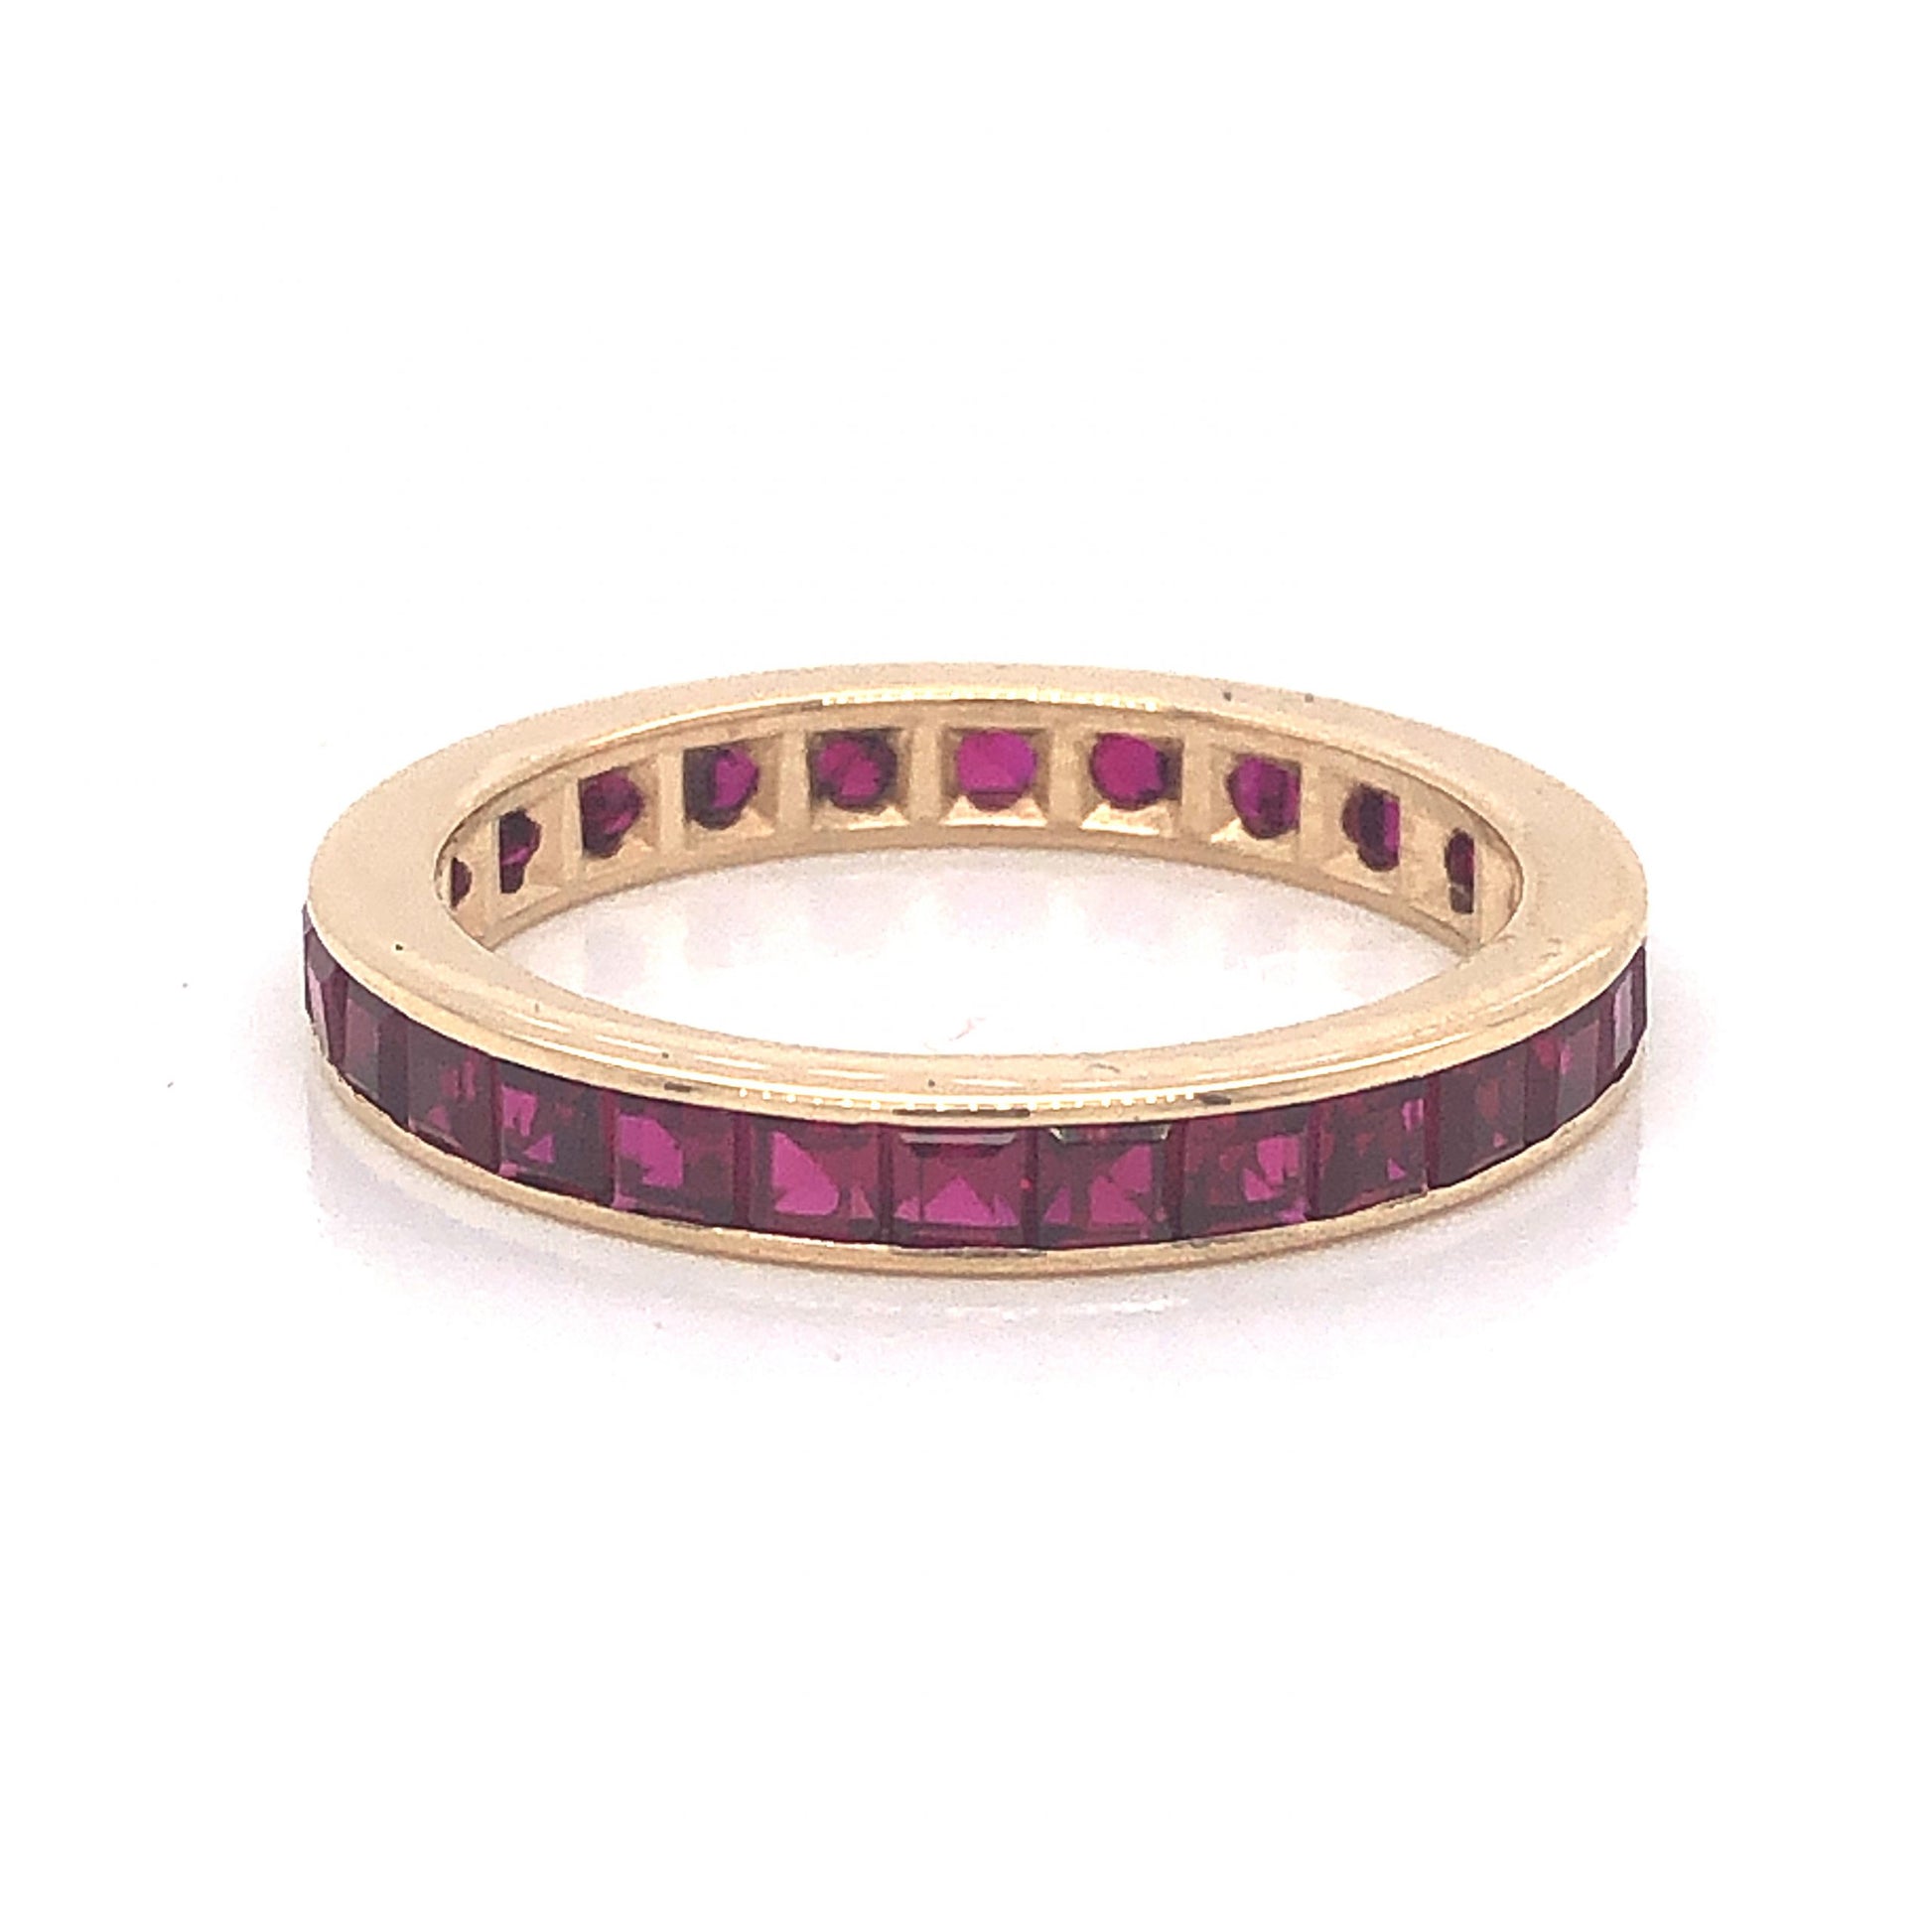 Channel Set Ruby Eternity Wedding Band in 14k Yellow GoldComposition: 14 Karat Yellow Gold Ring Size: 6 Total Gram Weight: 1.9 g